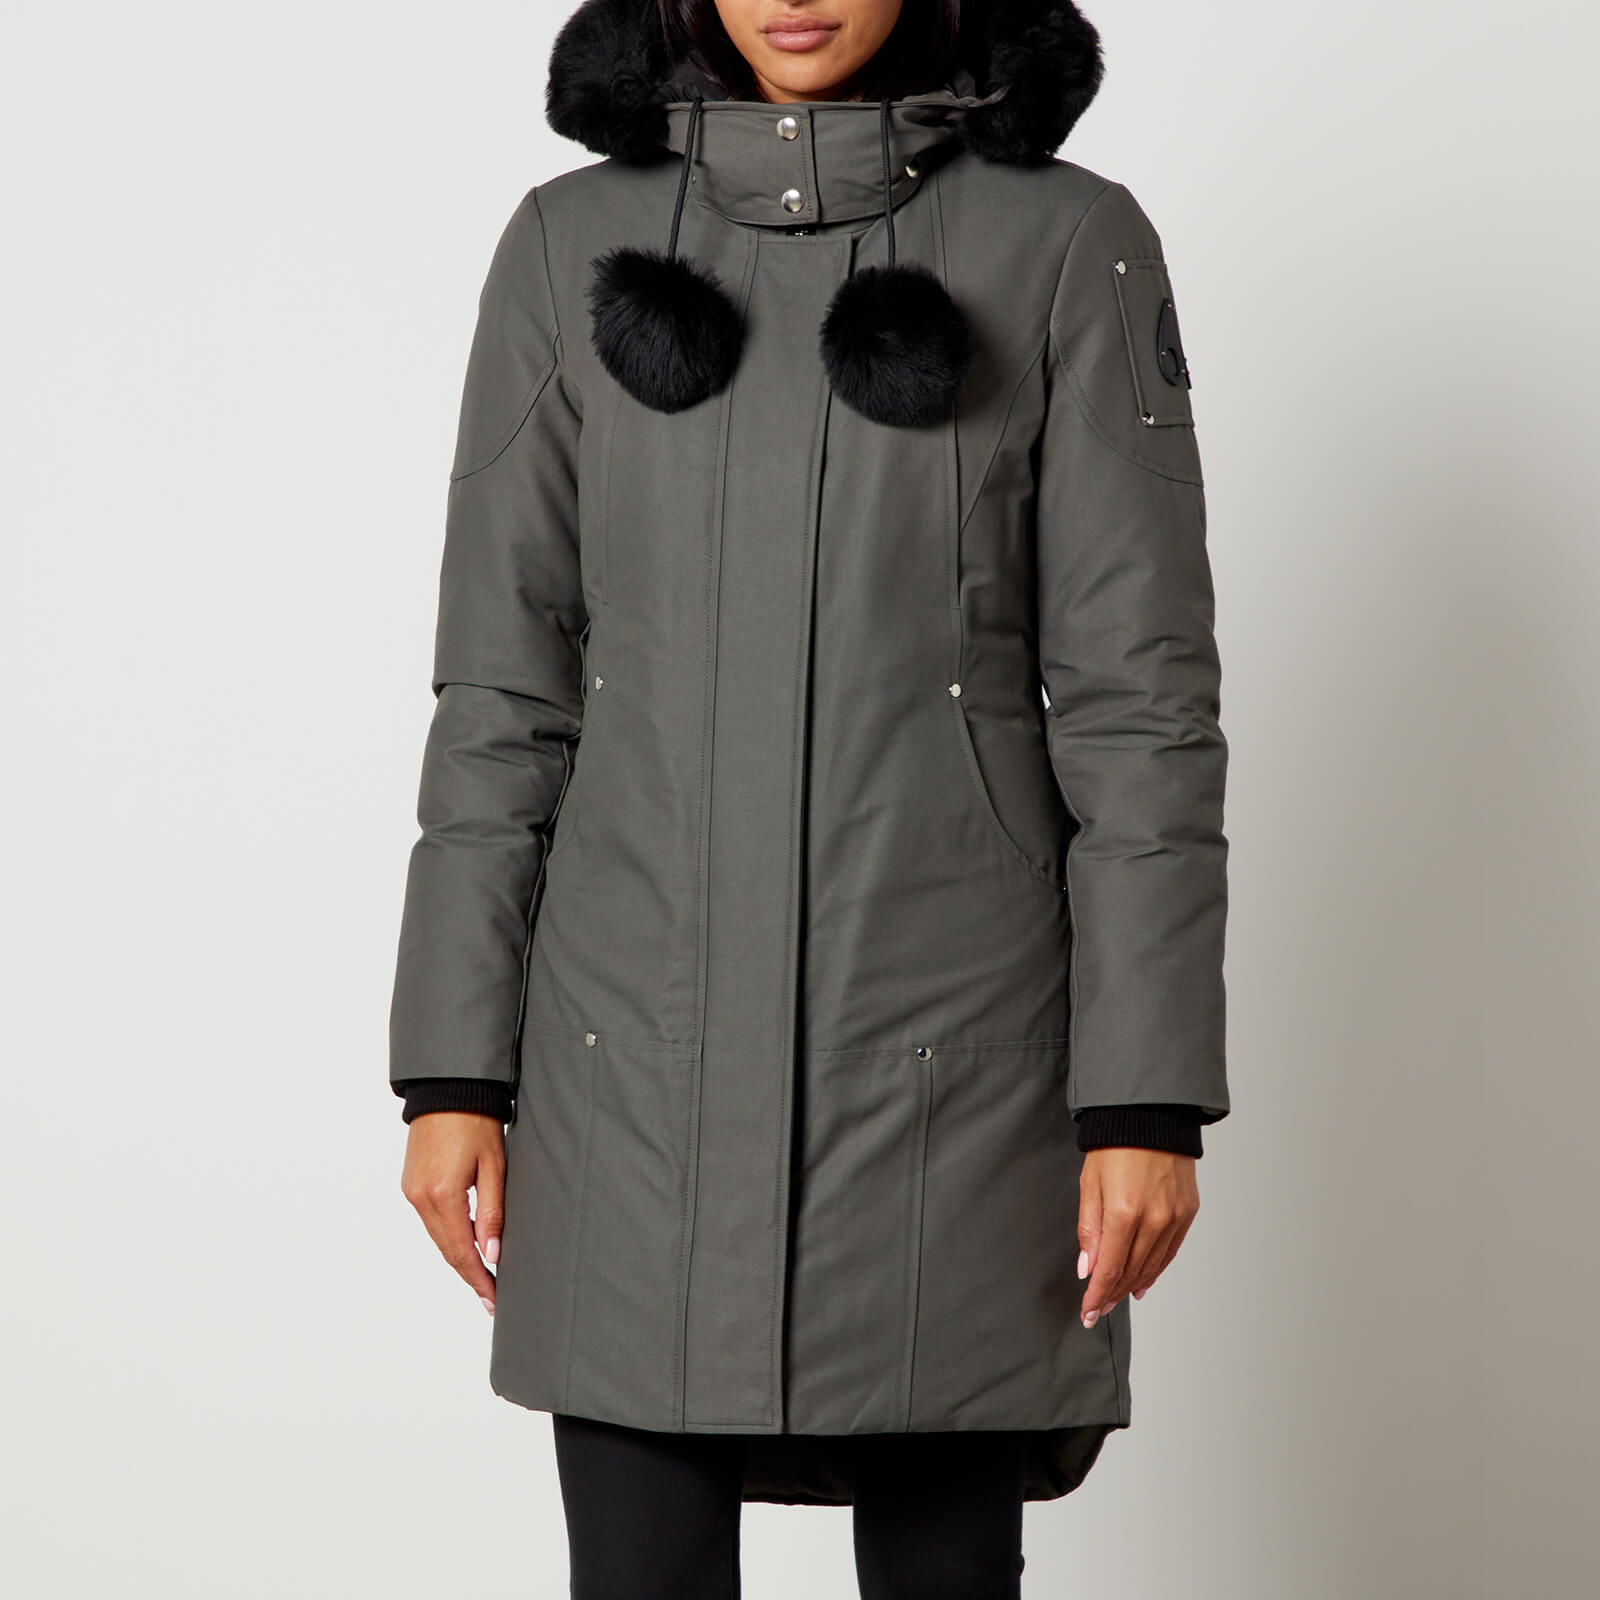 Moose Knuckles Stirling Cotton and Nylon Parka - XL